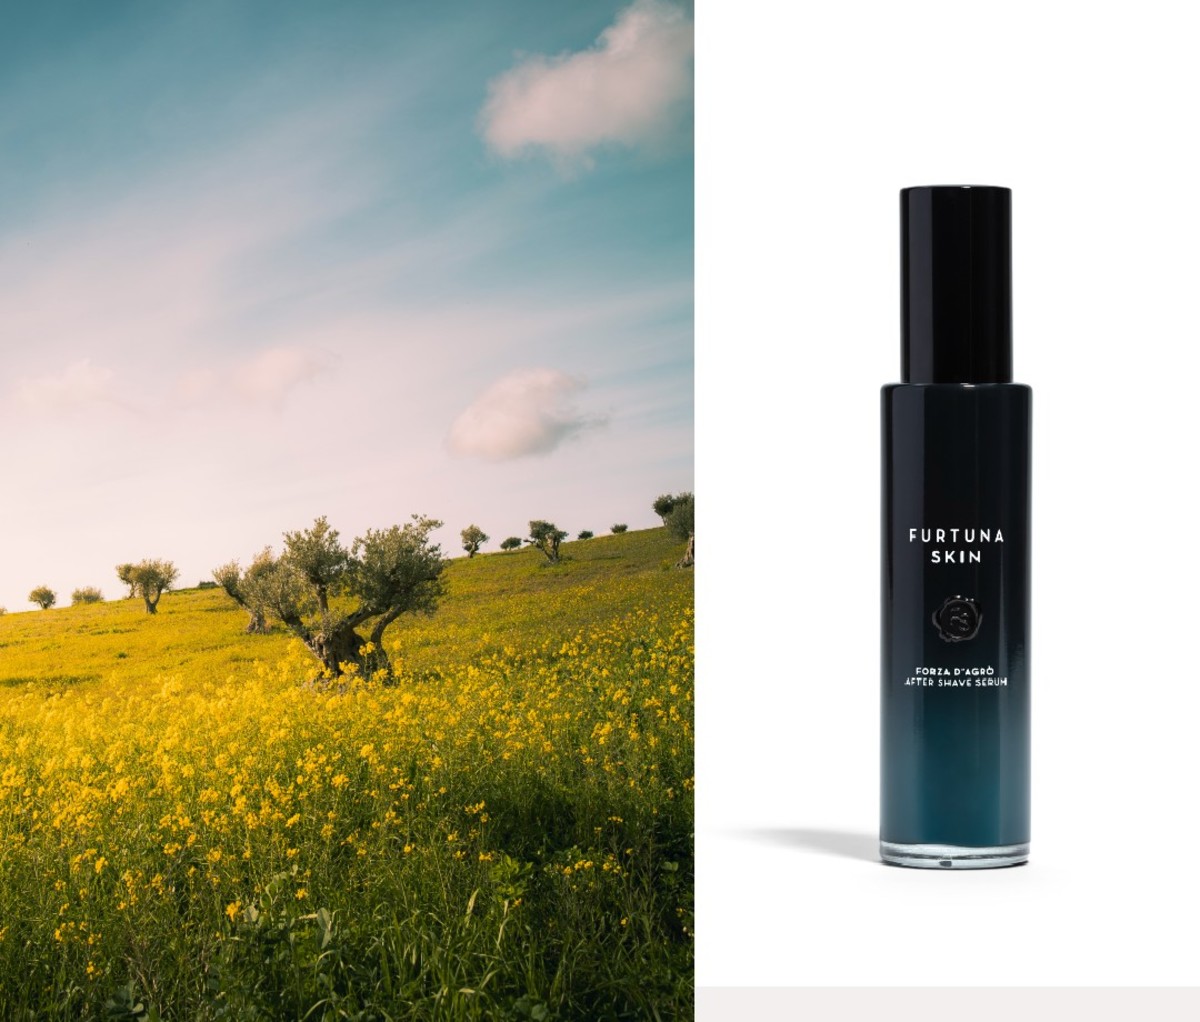 Furtuna Skin Forza d'Agrò After Shave Serum is crafted from wild-foraged plants in Sicily.